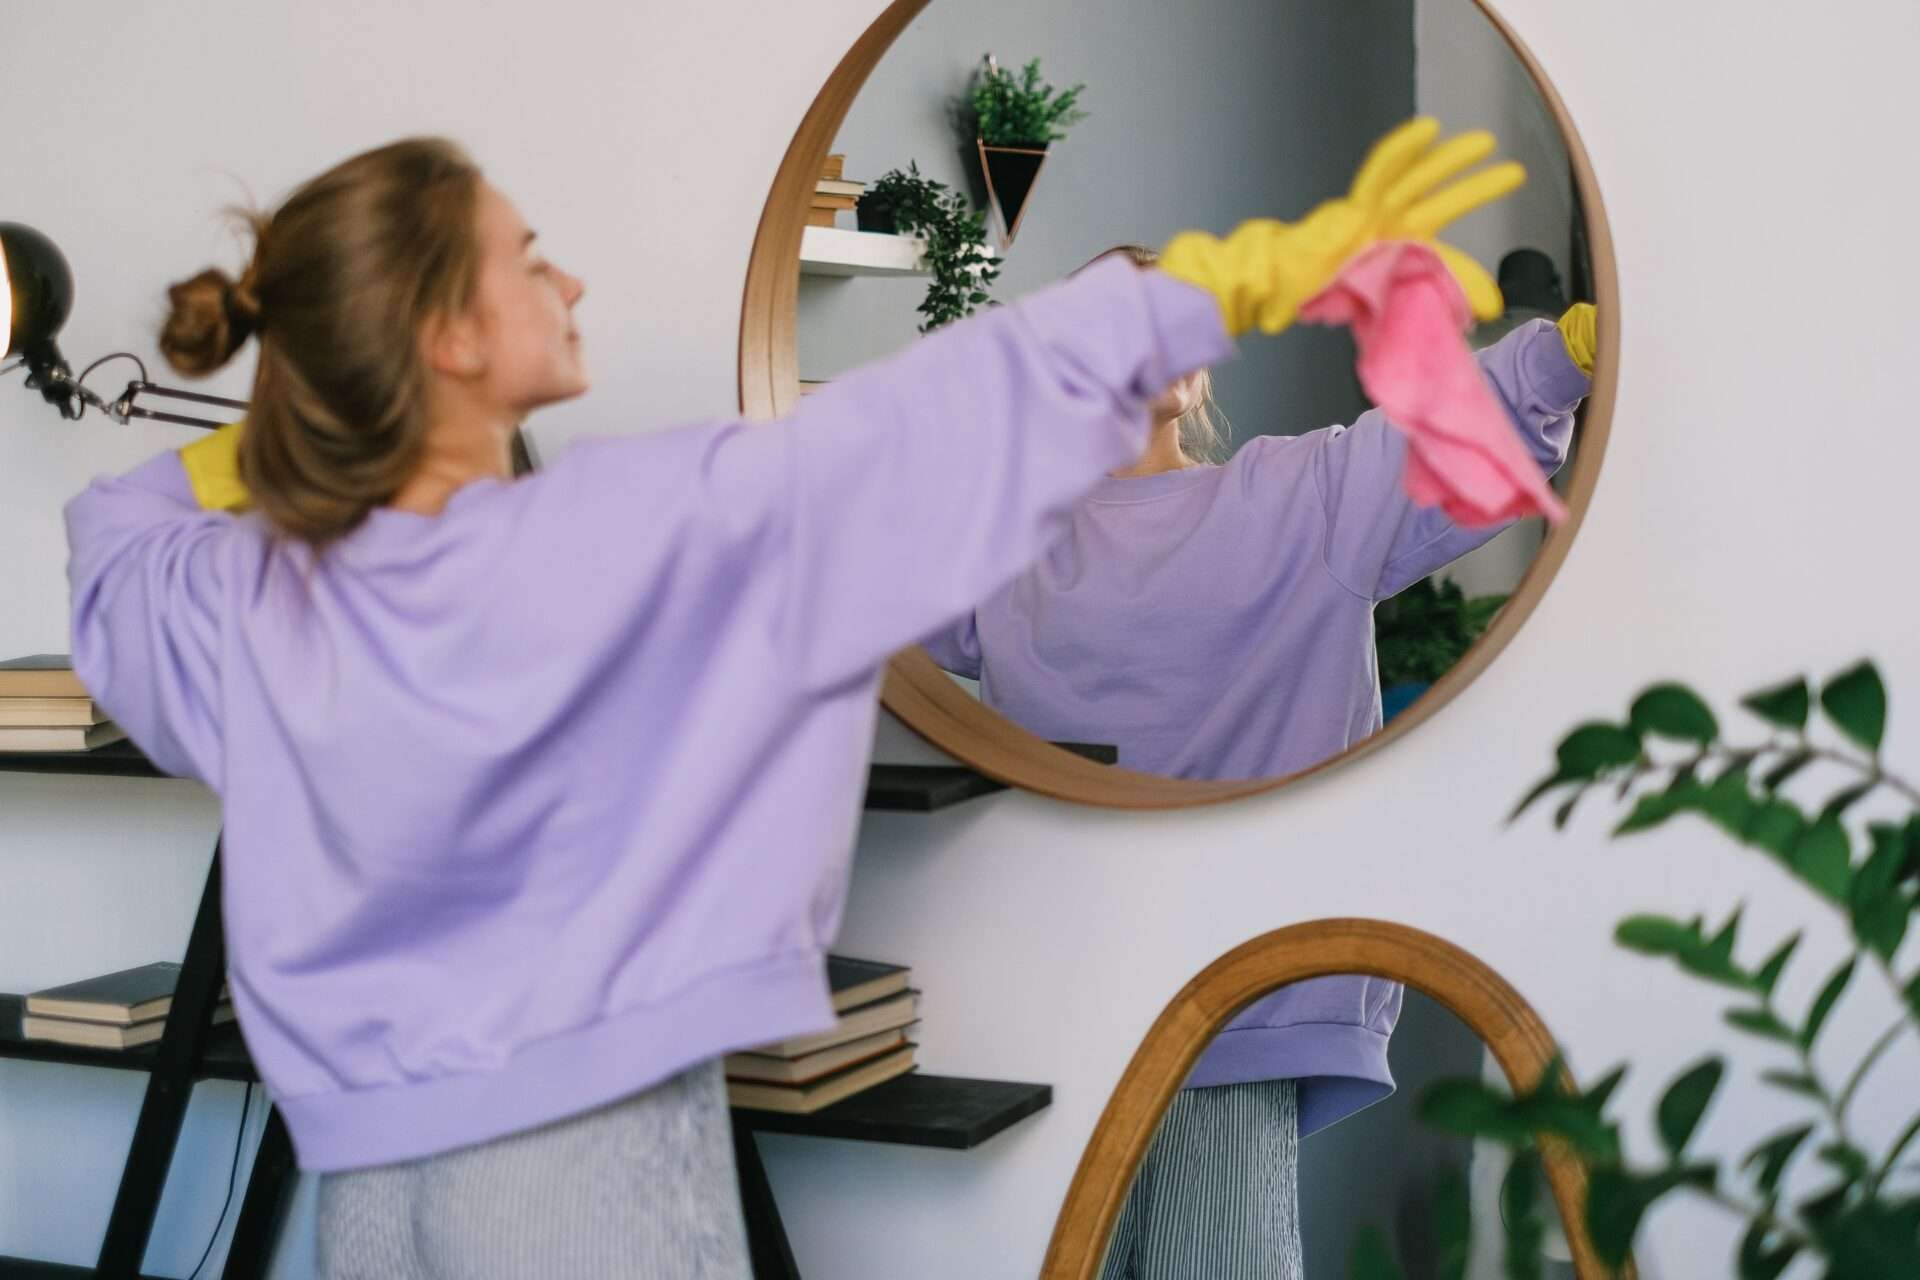 Women cleaning